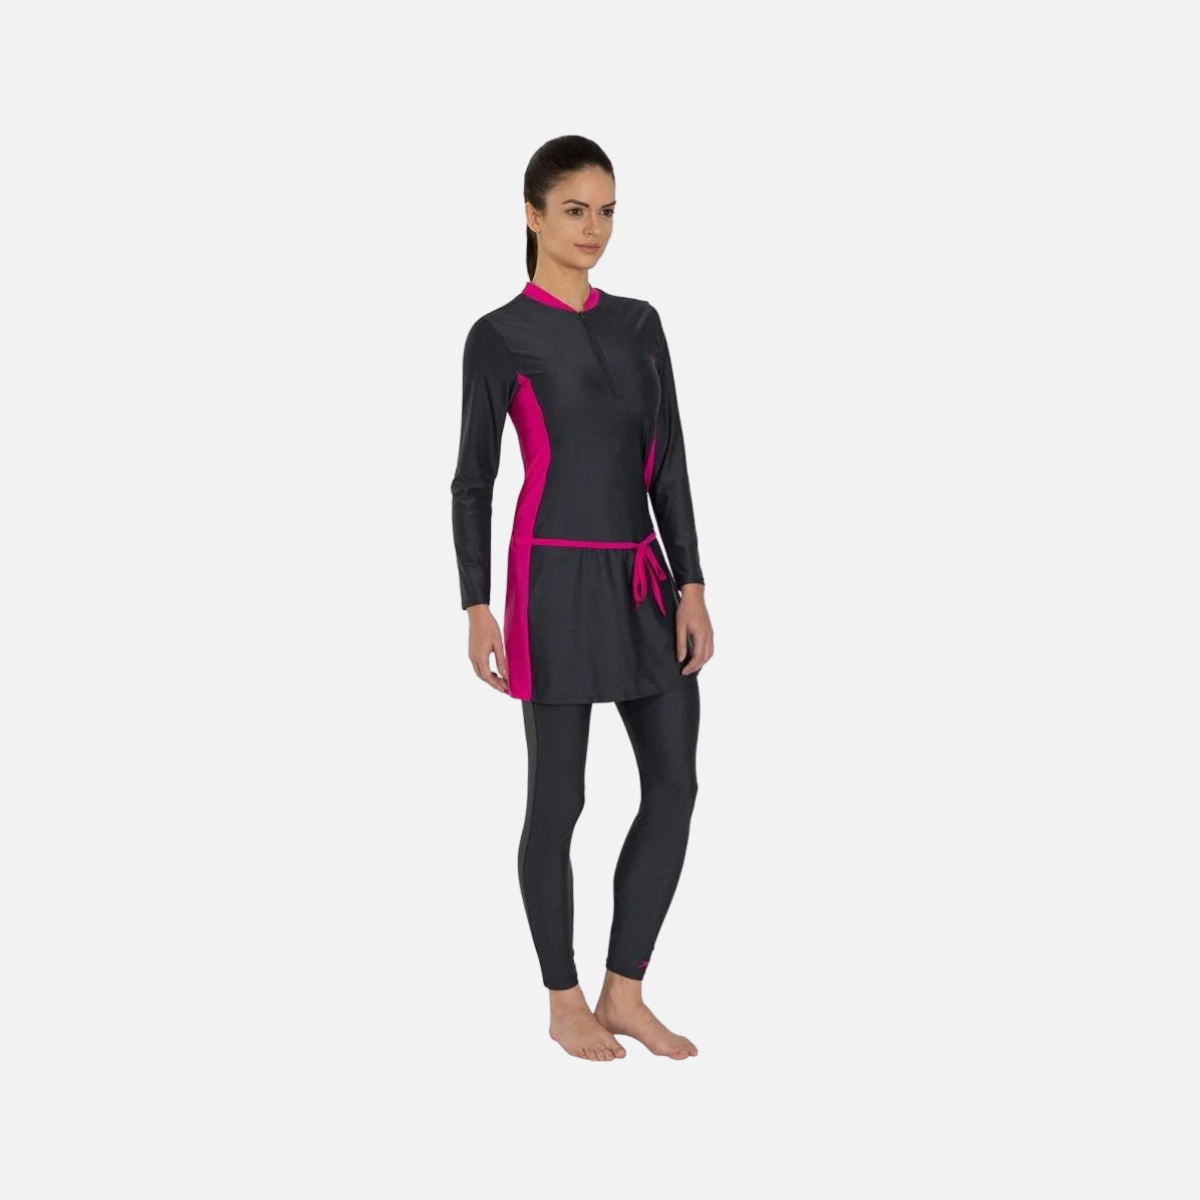 Speedo Adult Female 2Pc Full Body Suit -Oxid Grey/Electric Pink